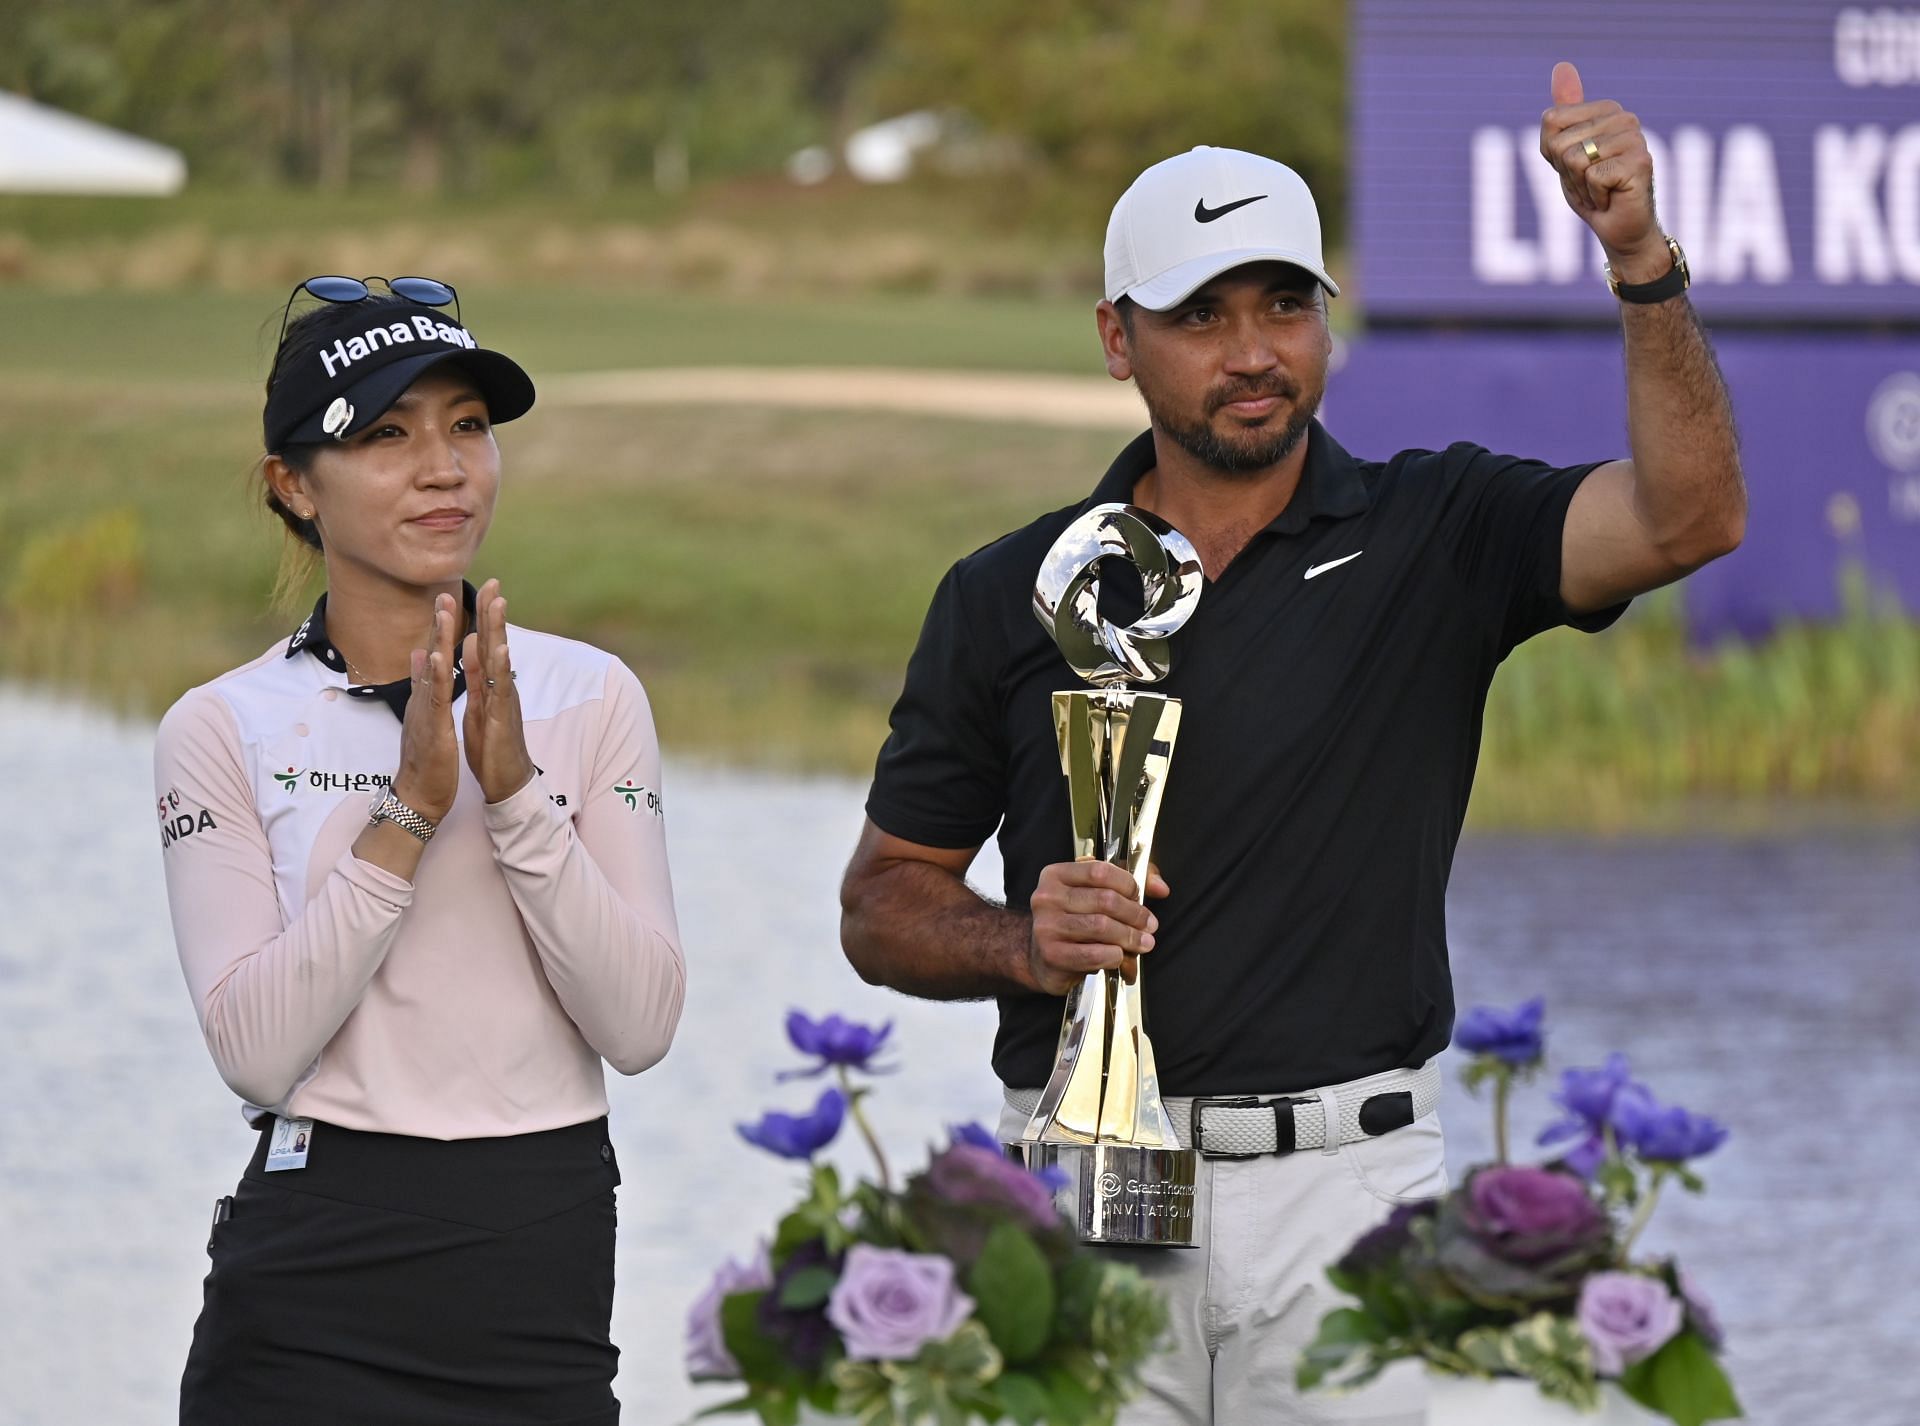 How much did Lydia Ko and Jason Day earn at the Grant Thornton